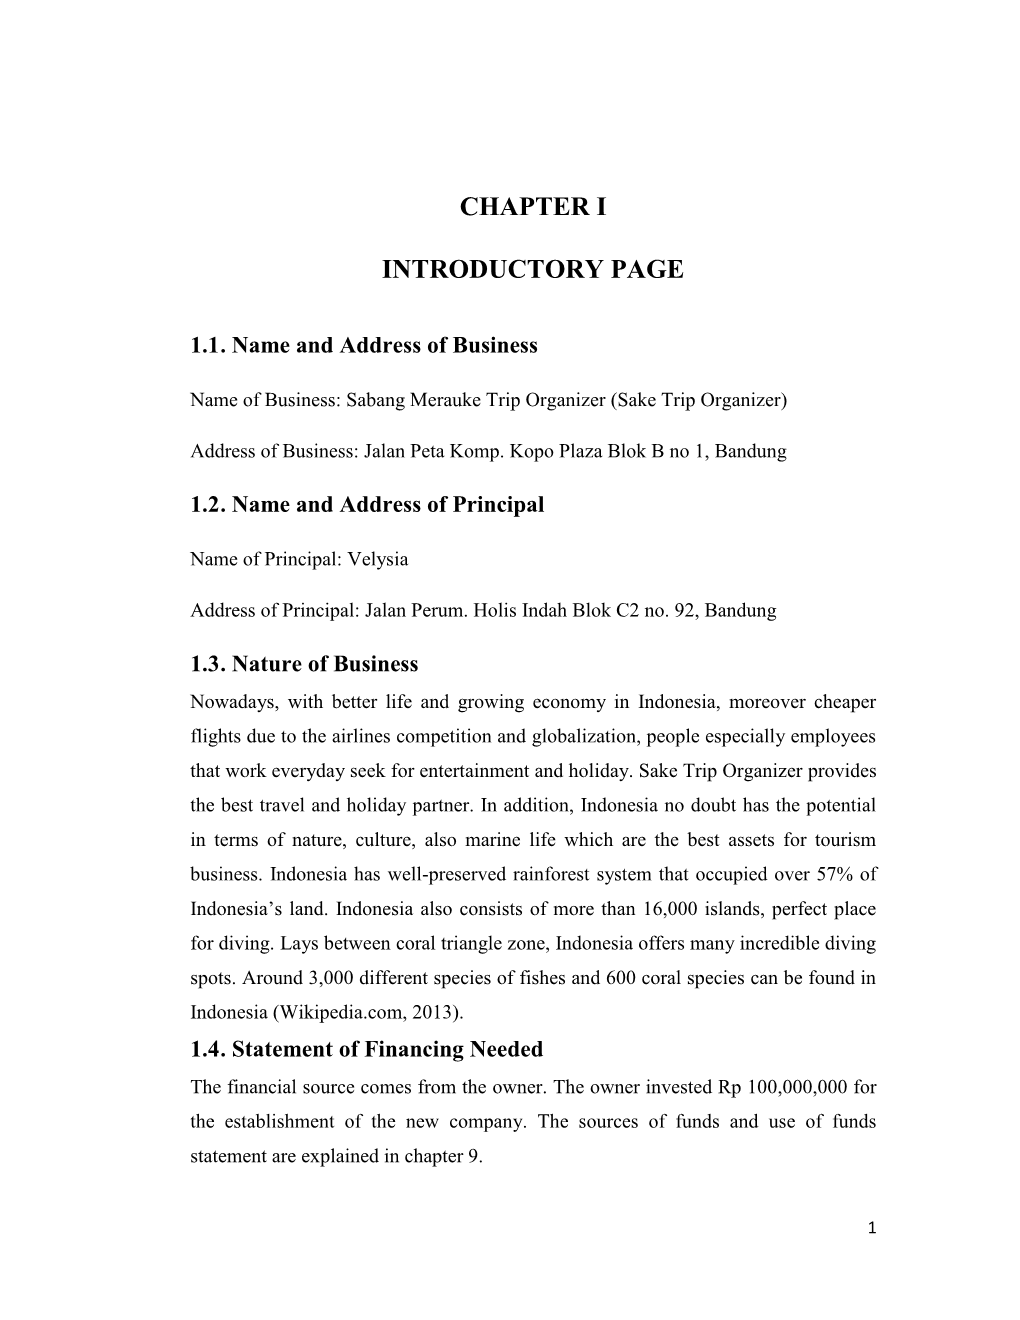 Chapter I Introductory Page